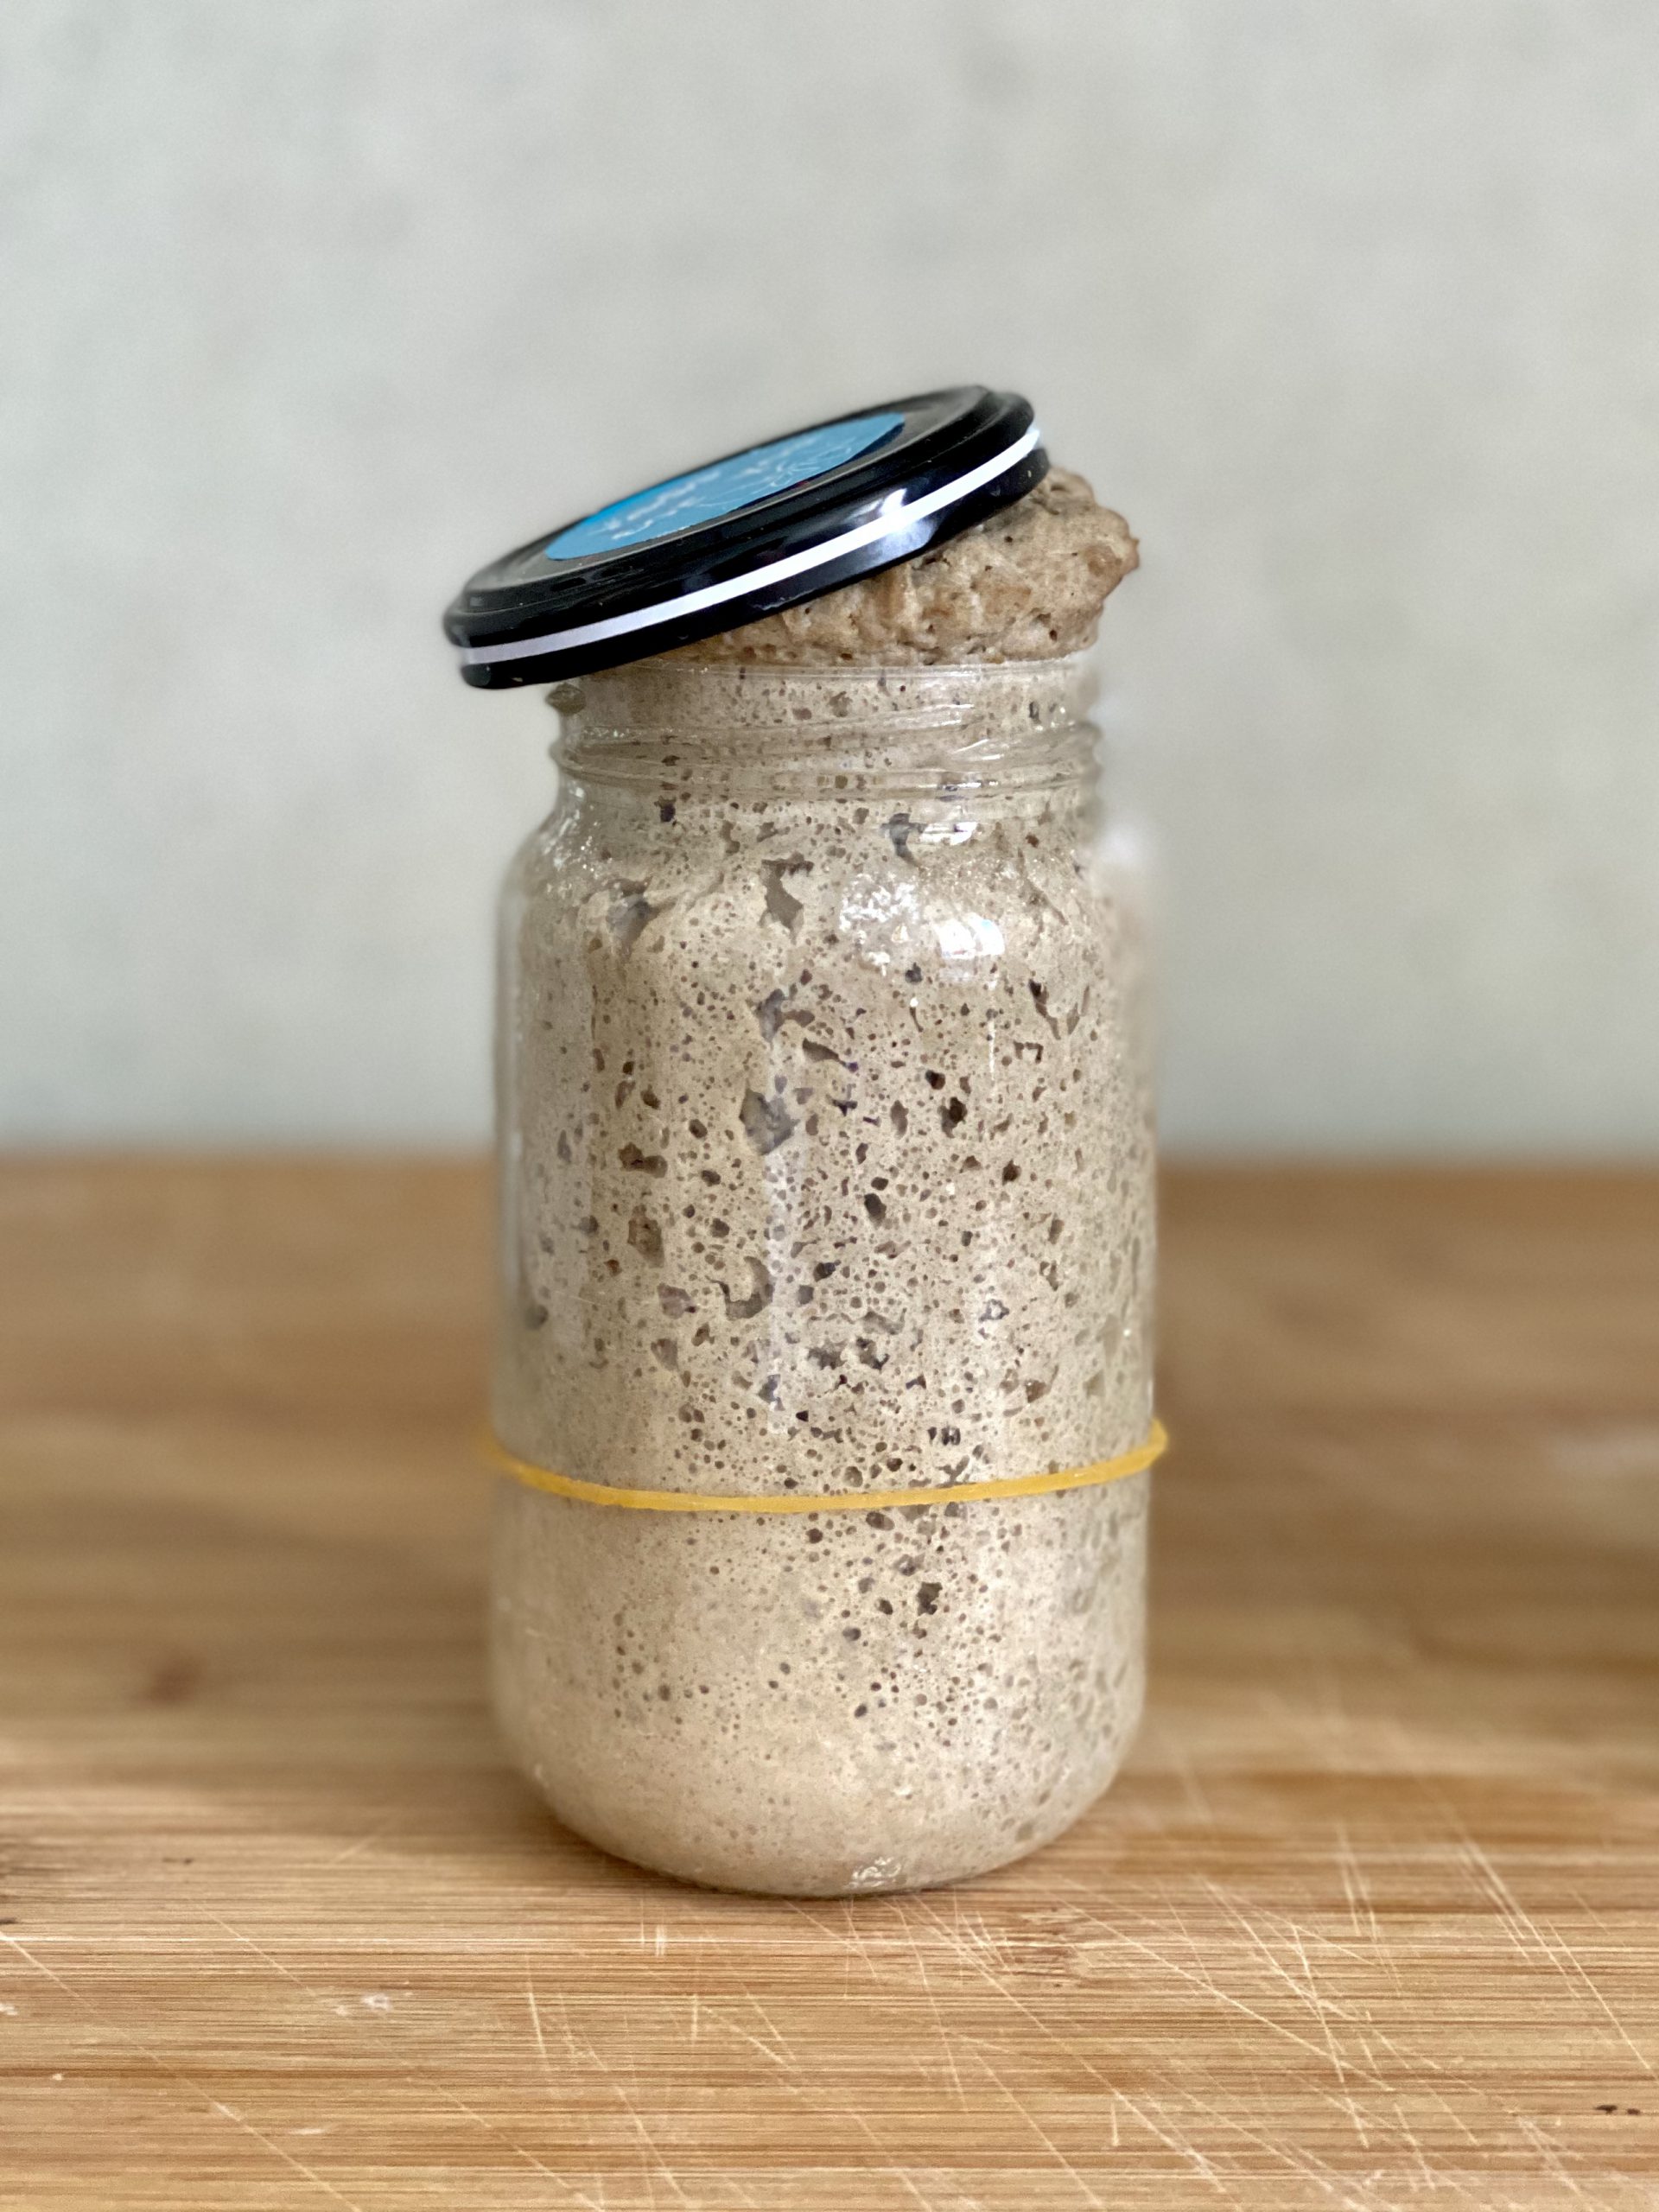 1/ How to make a sourdough starter from scratch